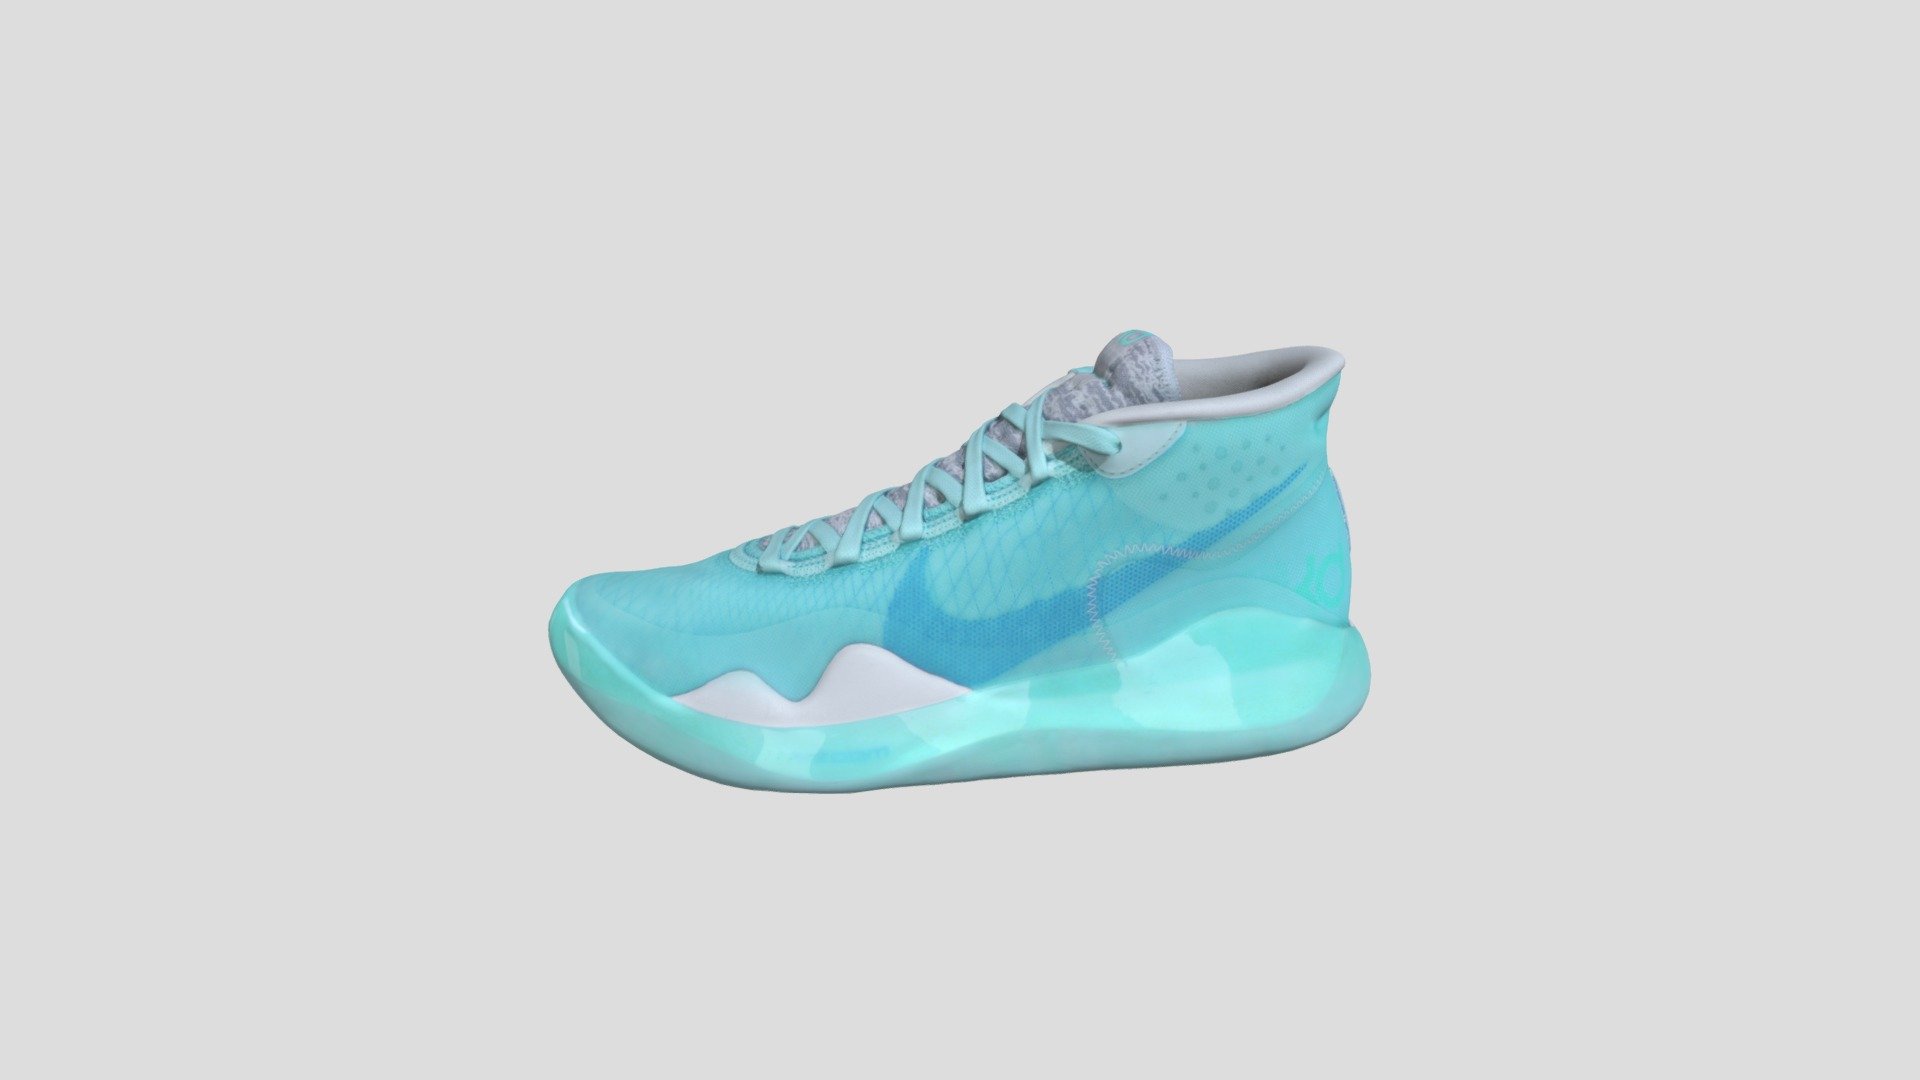 This model was created firstly by 3D scanning on retail version, and then being detail-improved manually, thus a 1:1 repulica of the original
PBR ready
Low-poly
4K texture
Welcome to check out other models we have to offer. And we do accept custom orders as well :) - Nike Zoom KD 12 “Blue Gaze” EP 凝蓝_AR4230-400 - Buy Royalty Free 3D model by TRARGUS 3d model